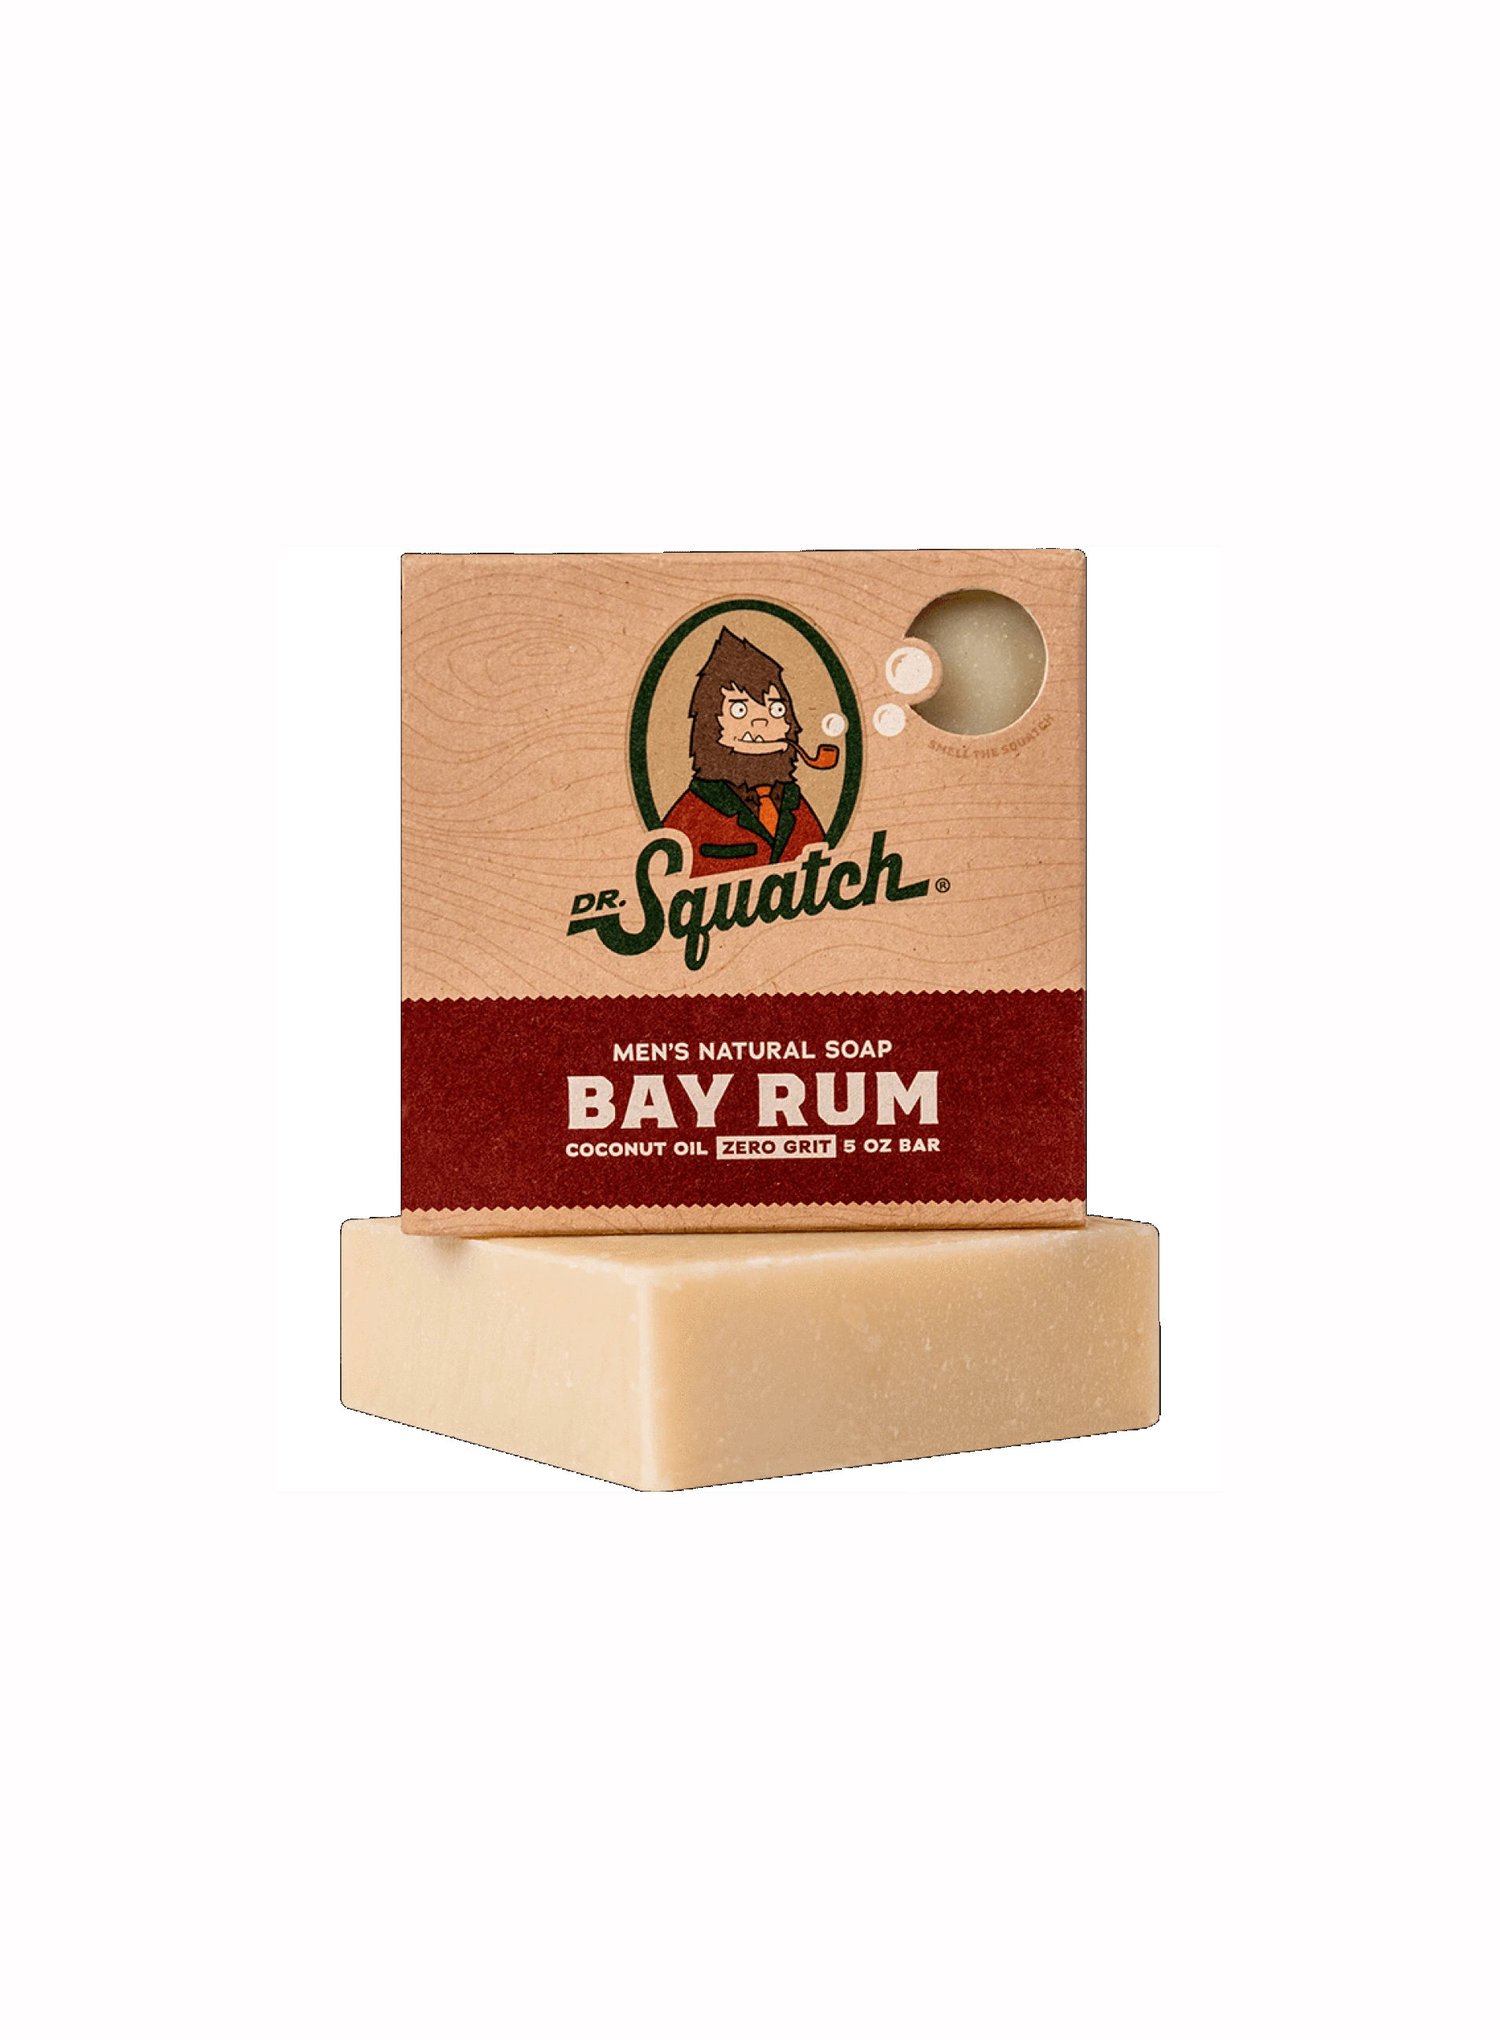 Dr. Squatch Baby Rum Bar Soap — Lost Objects, Found Treasures